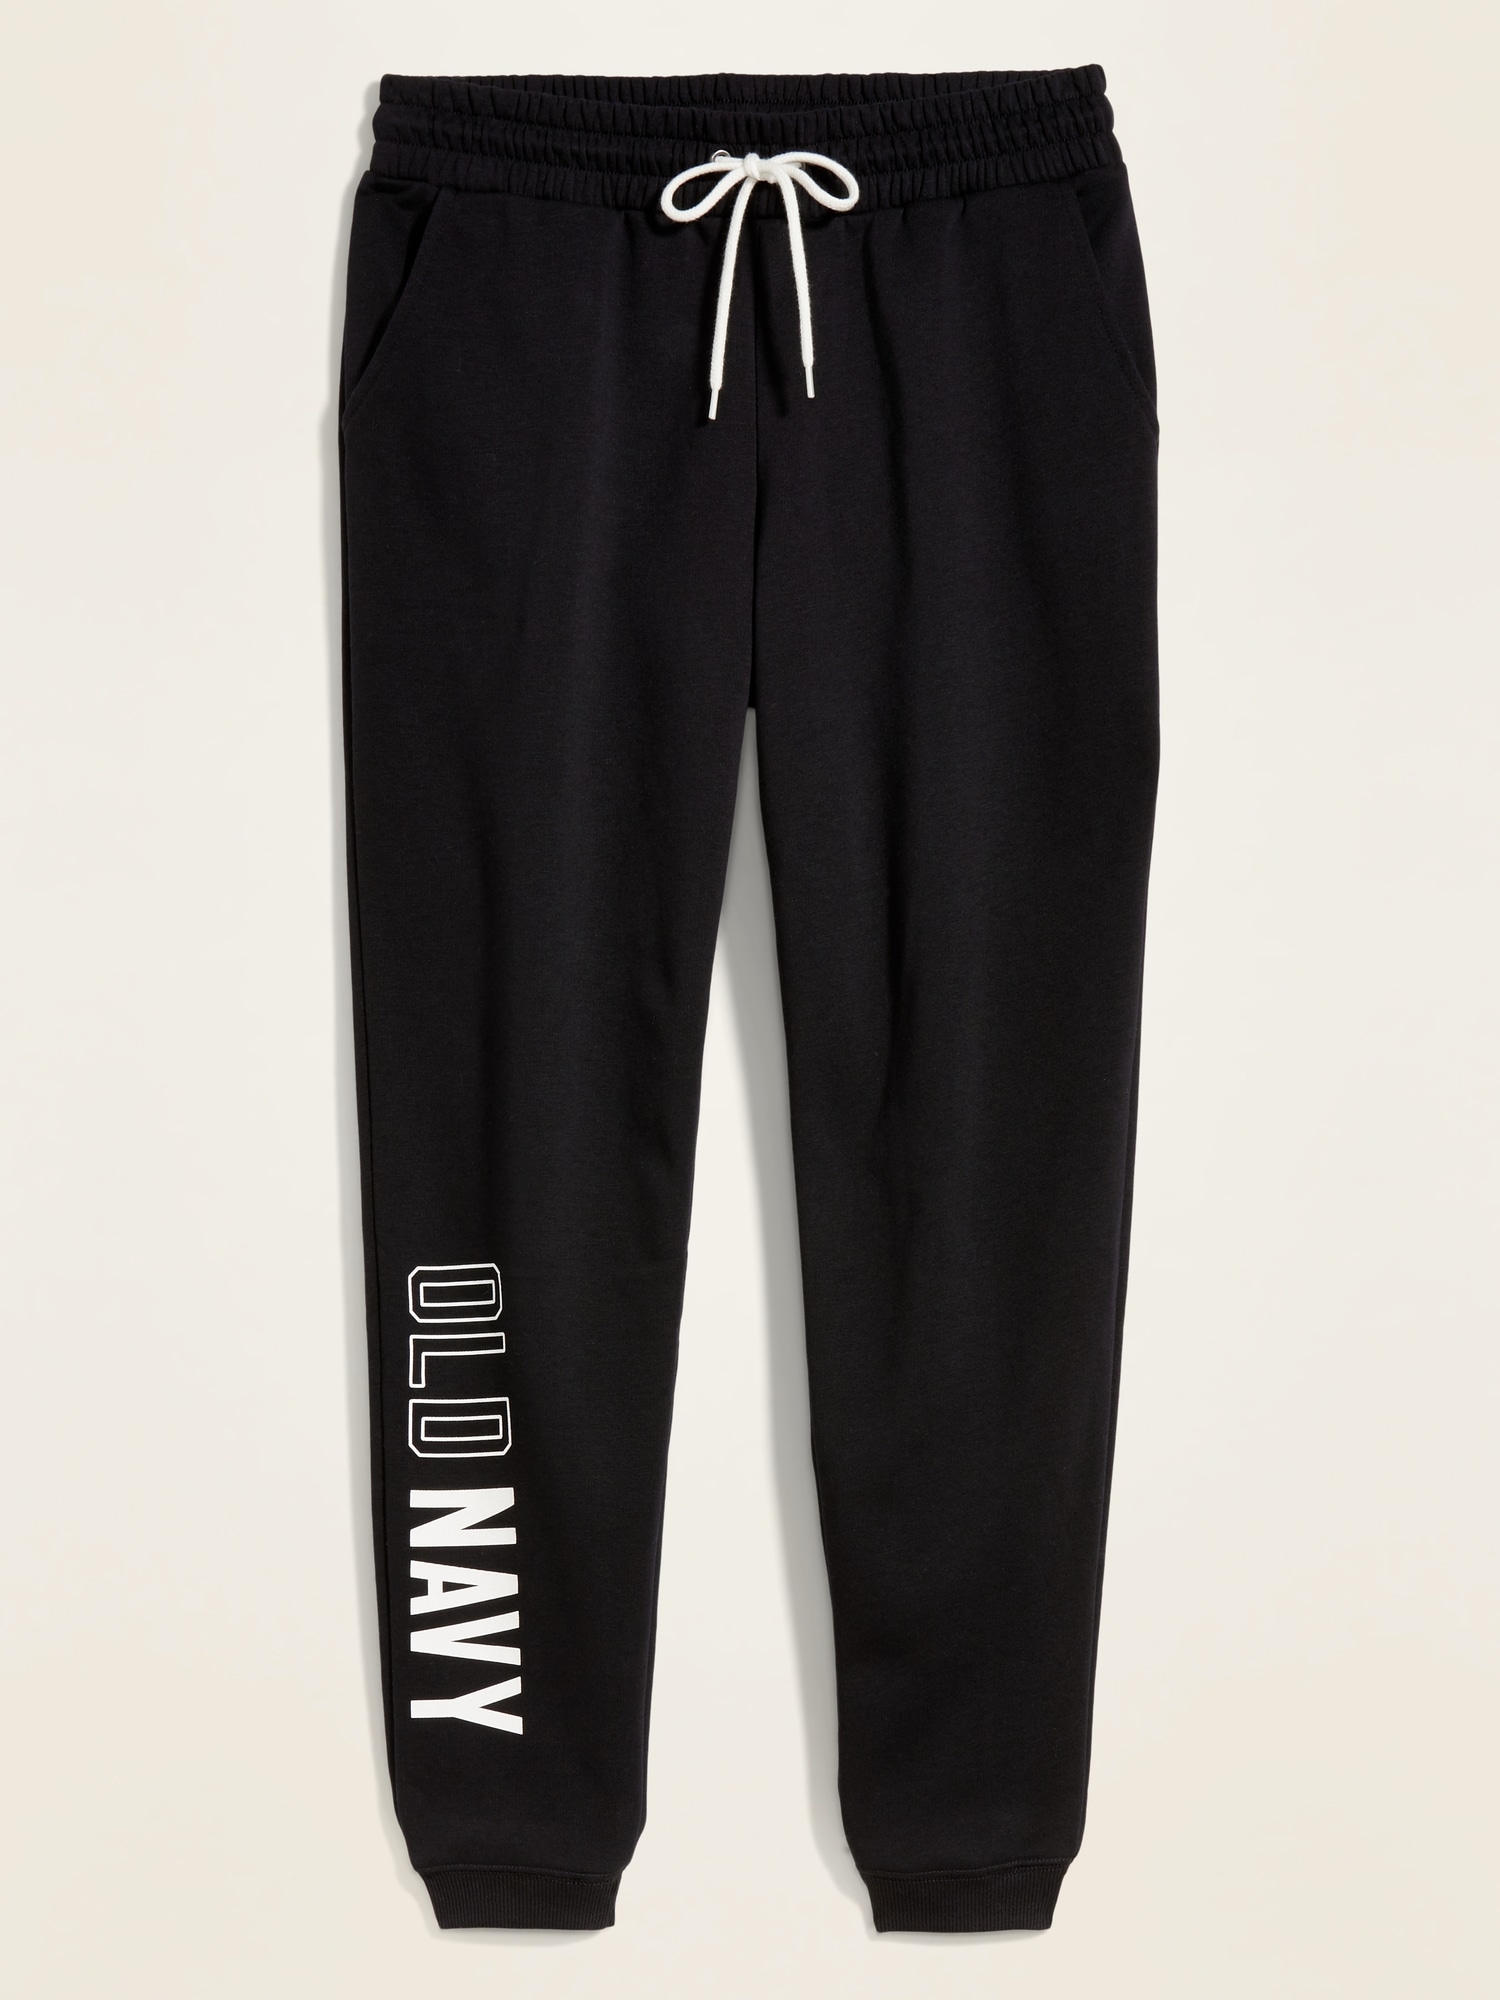 Women's Neon Vintage Logo Low Rise Flare Joggers in Bison Black